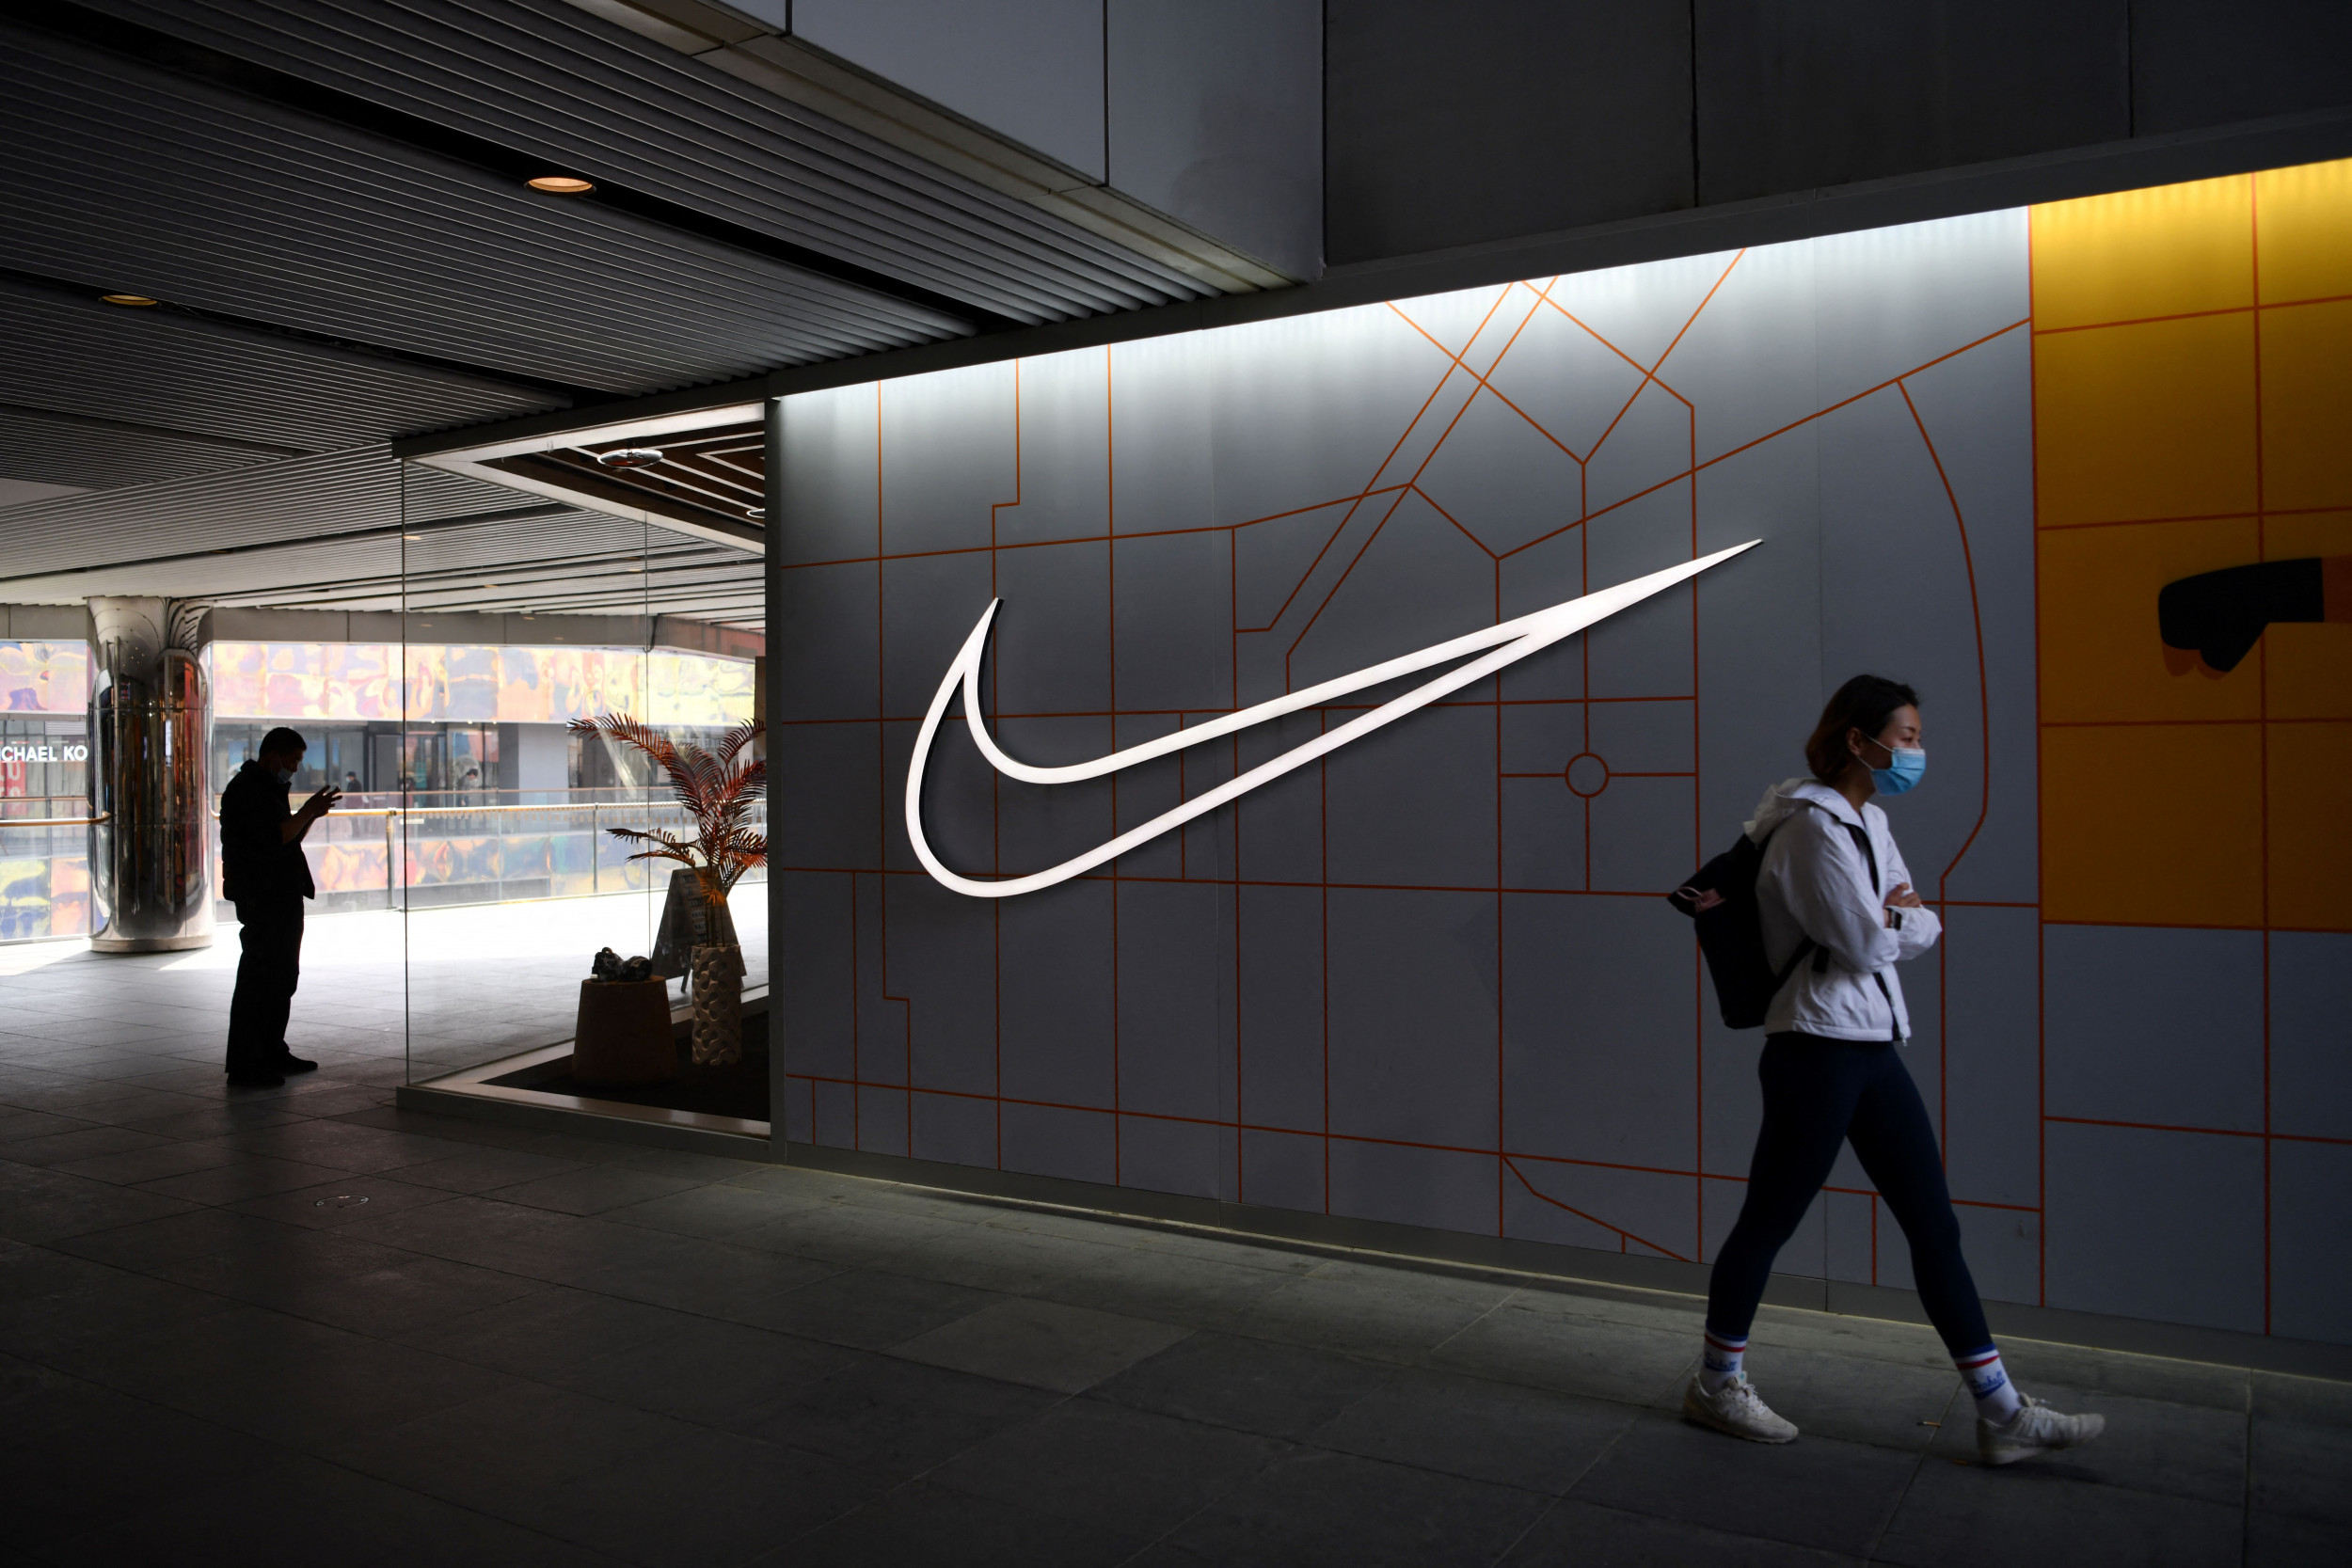 Why H&M, Nike and Others Are Being Boycotted in China - The New York Times